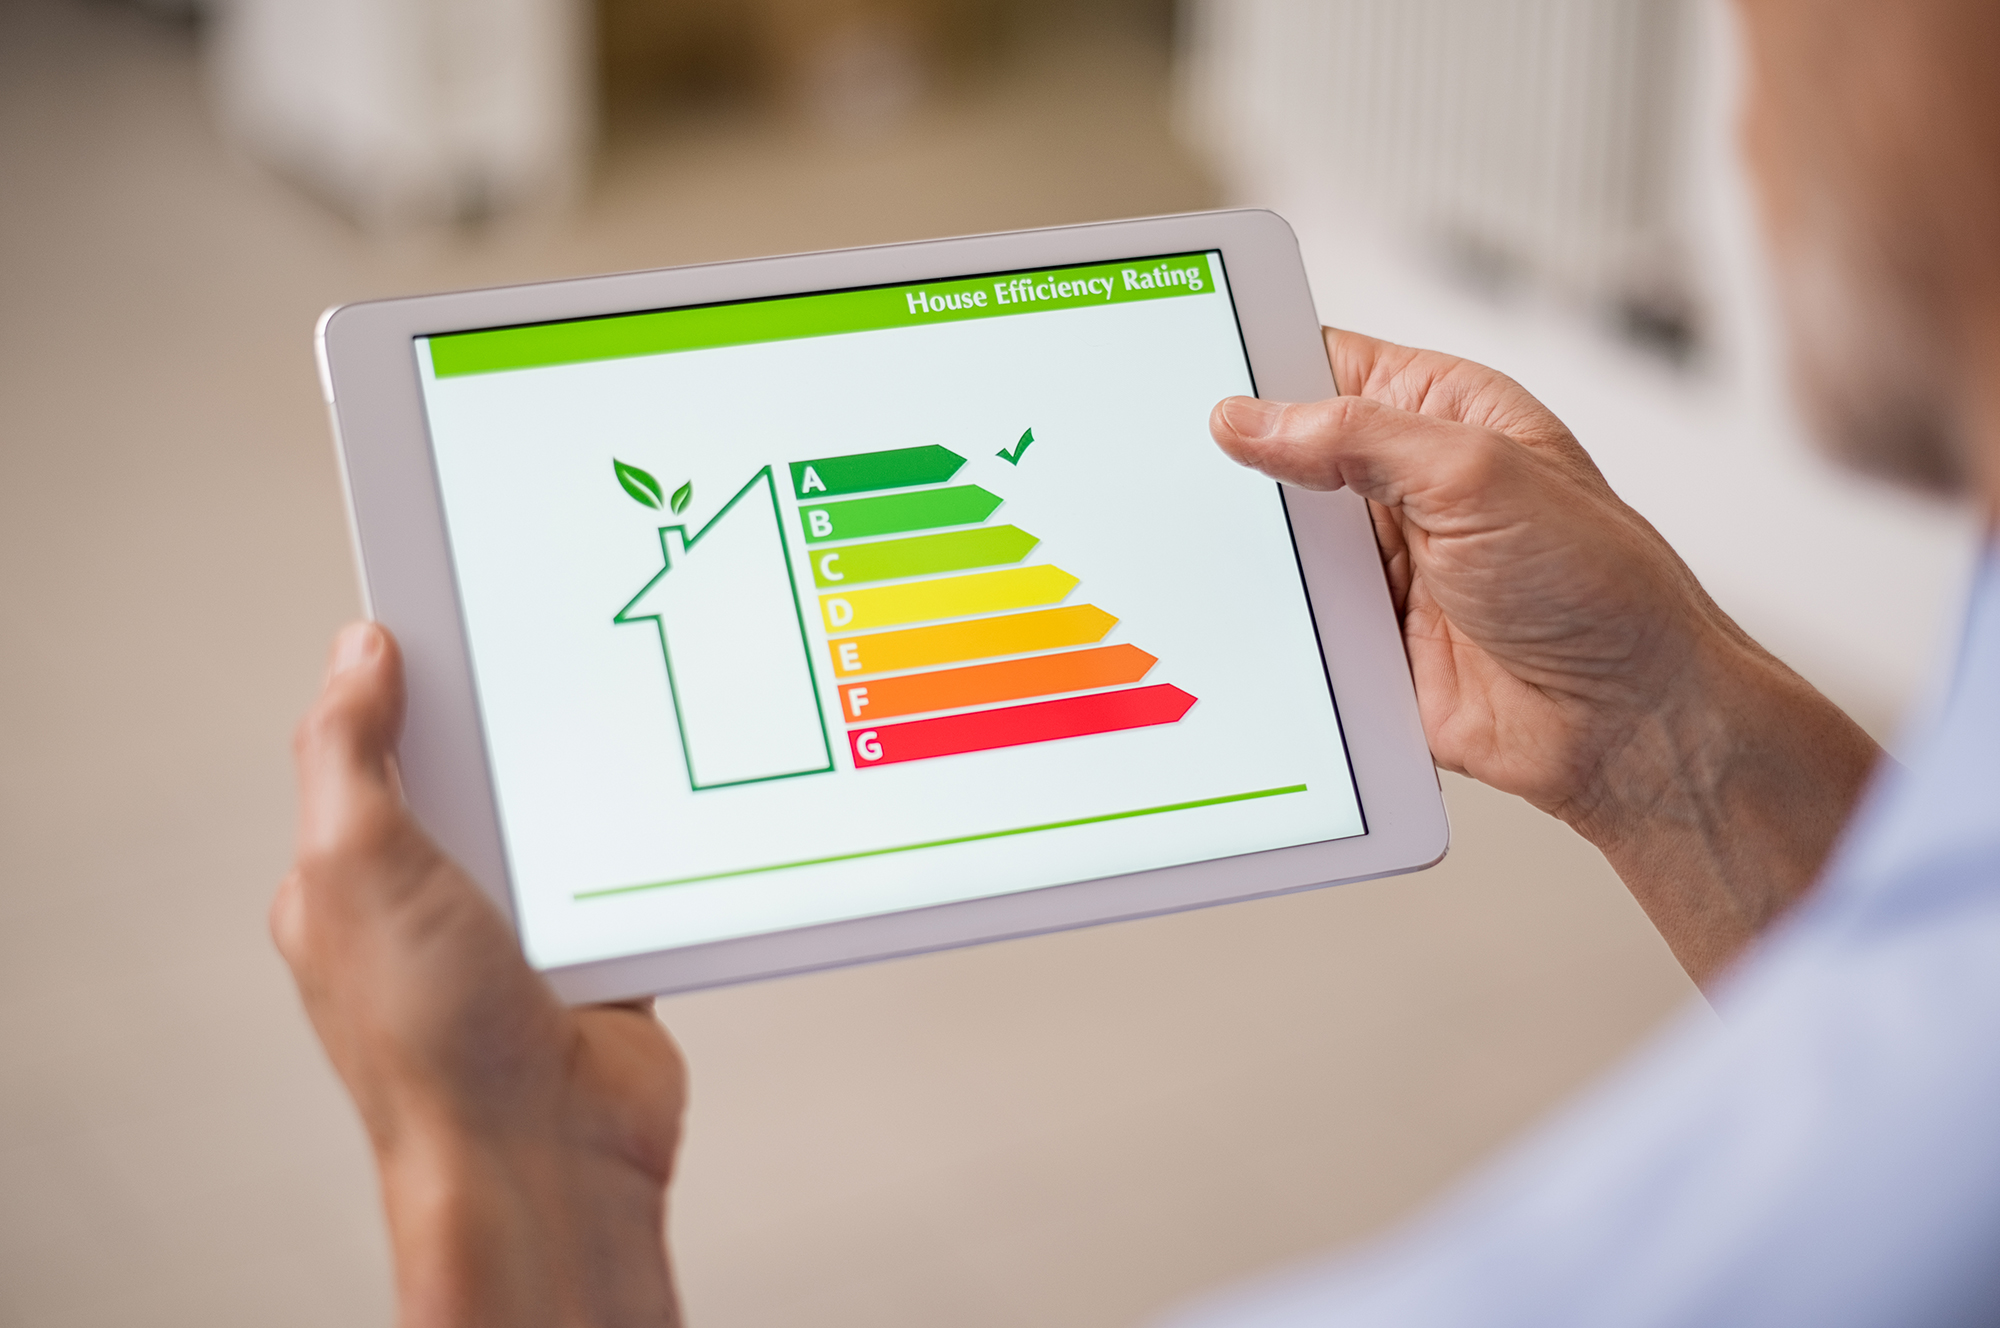 House efficiency rating on an app. (Image: Shutterstock)